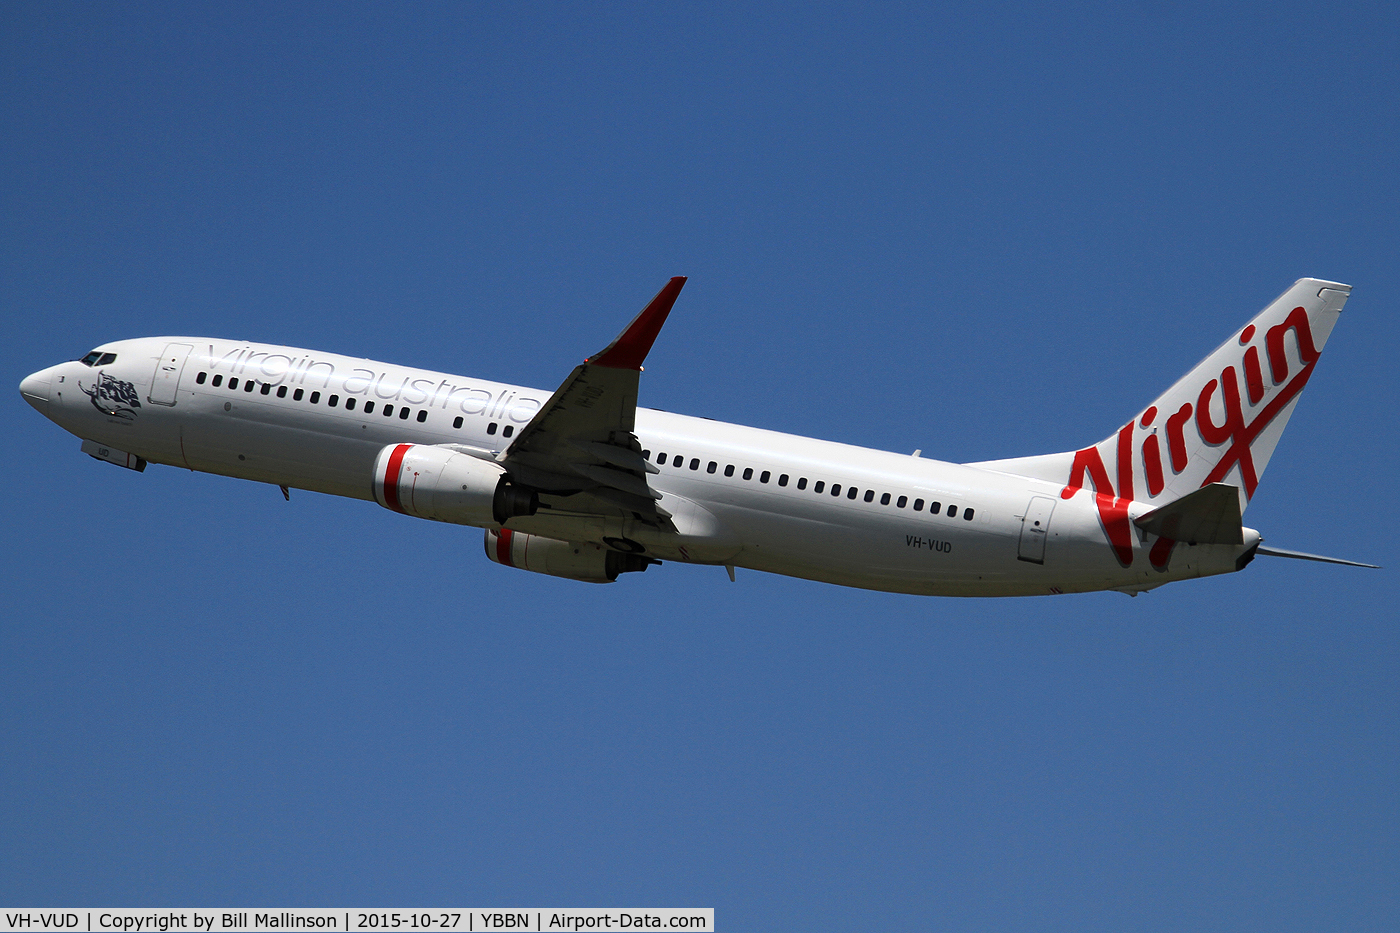 VH-VUD, 2004 Boeing 737-8FE C/N 34015, away from 01